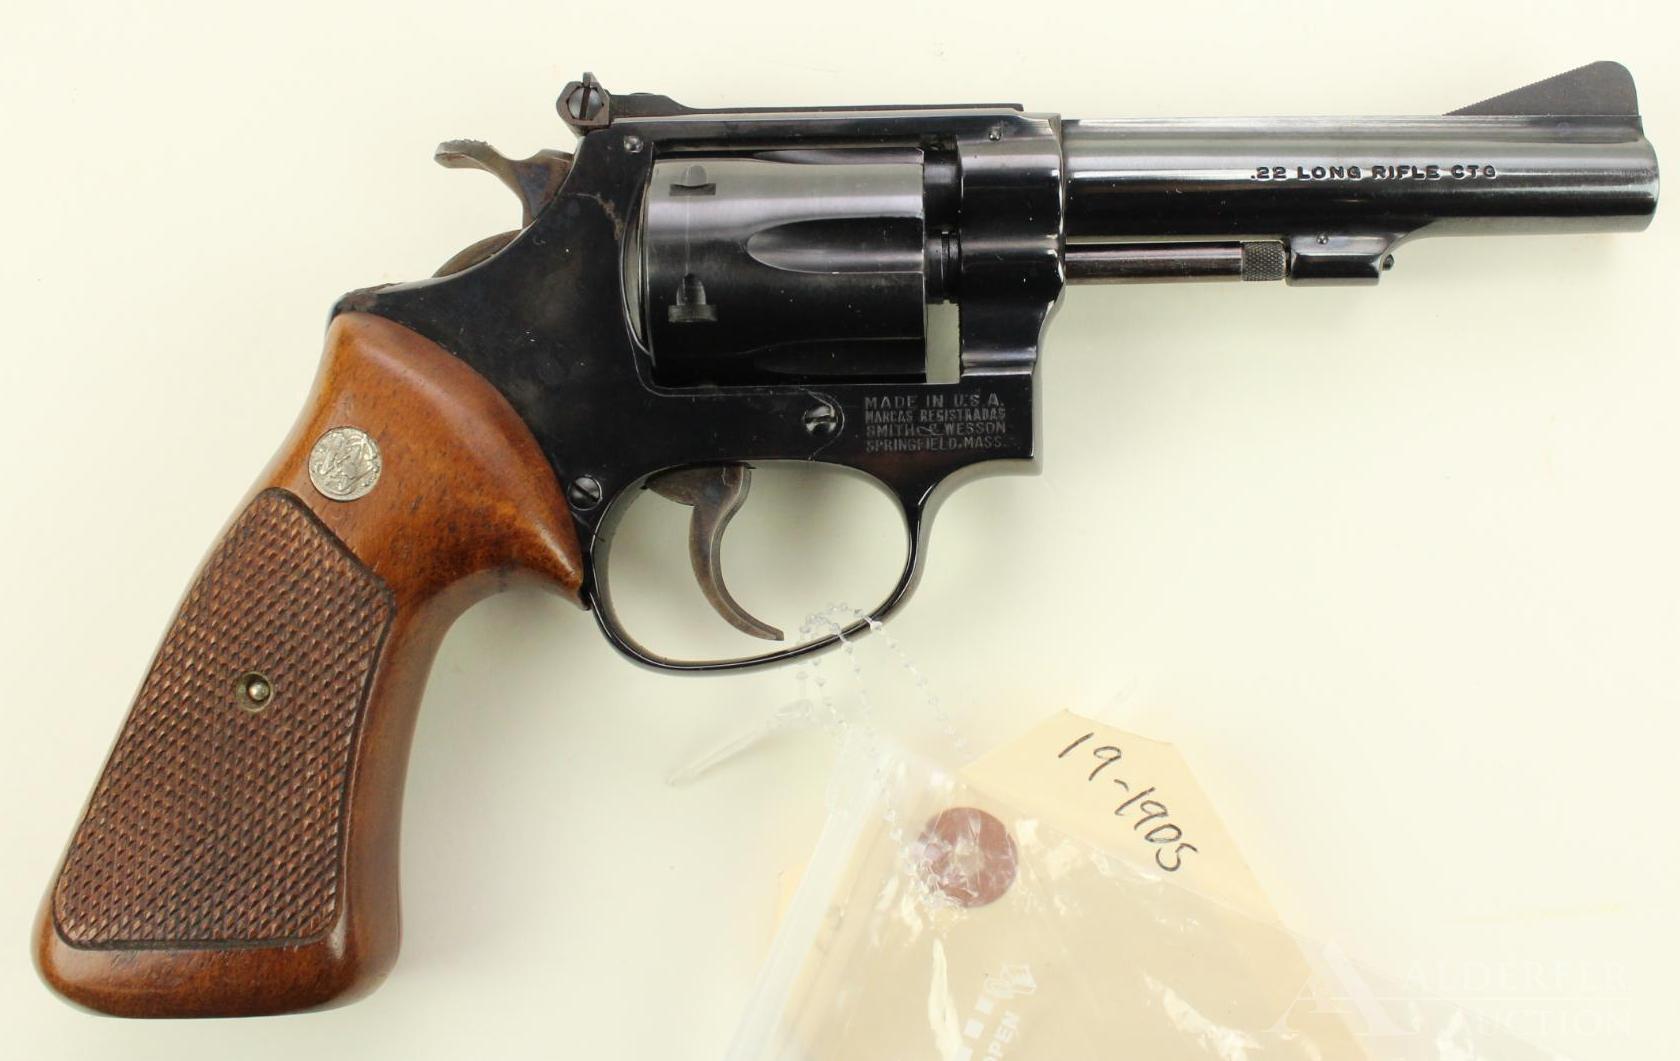 Smith & Wesson 34-1 double action revolver.